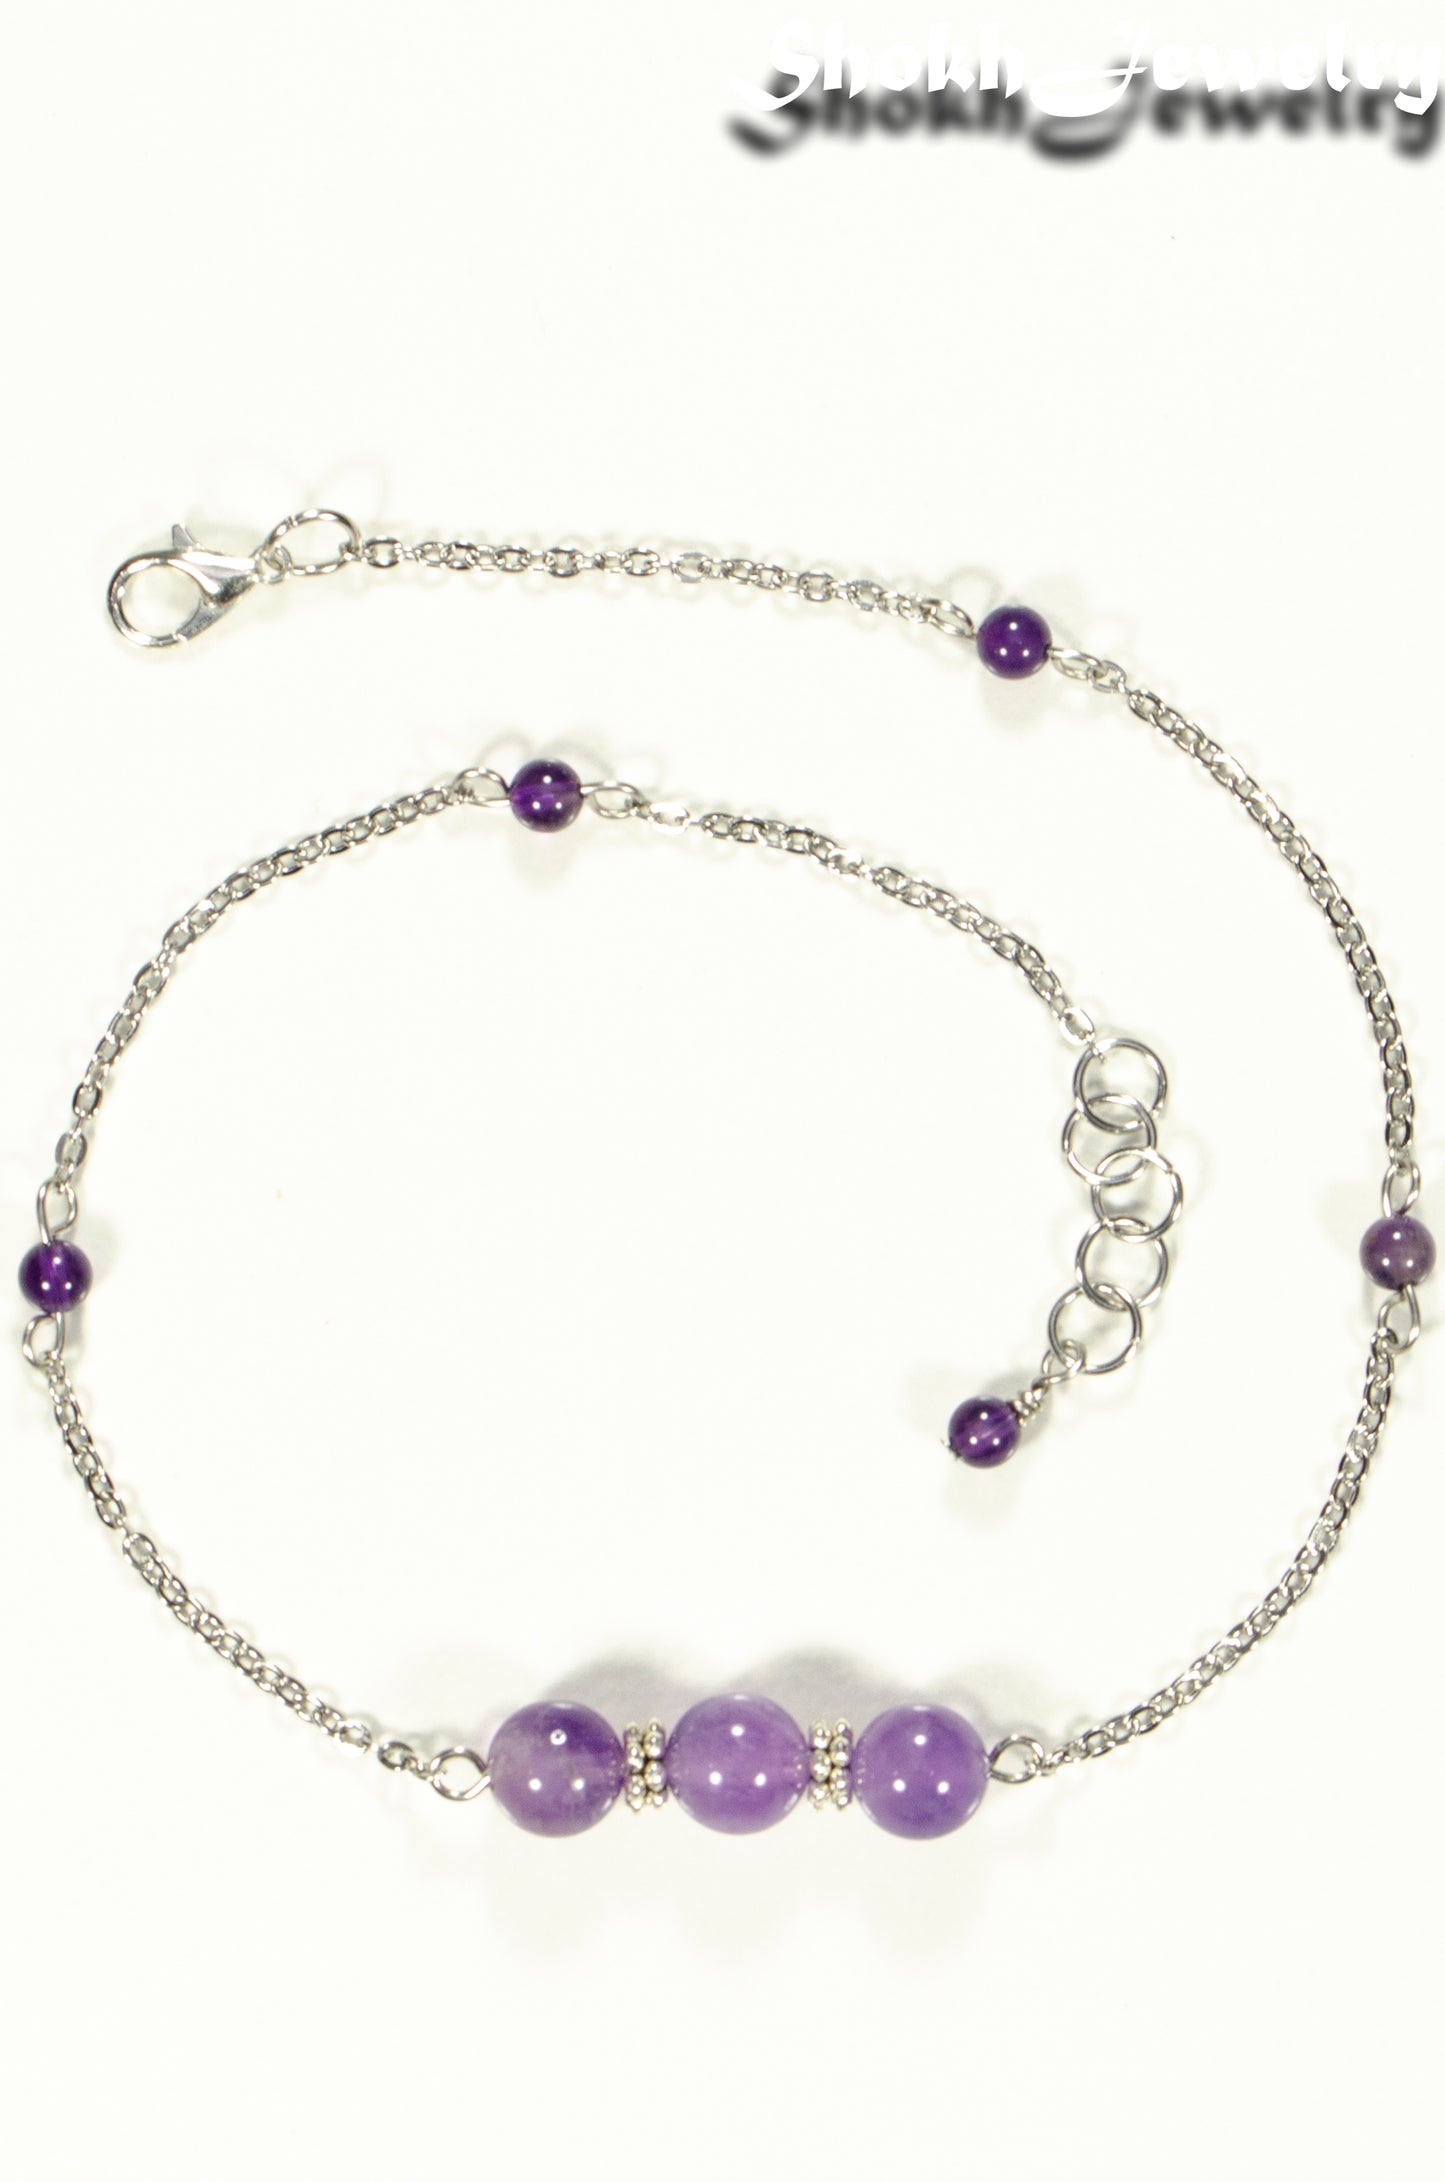 Top view of Natural Amethyst and Chain Choker Necklace.